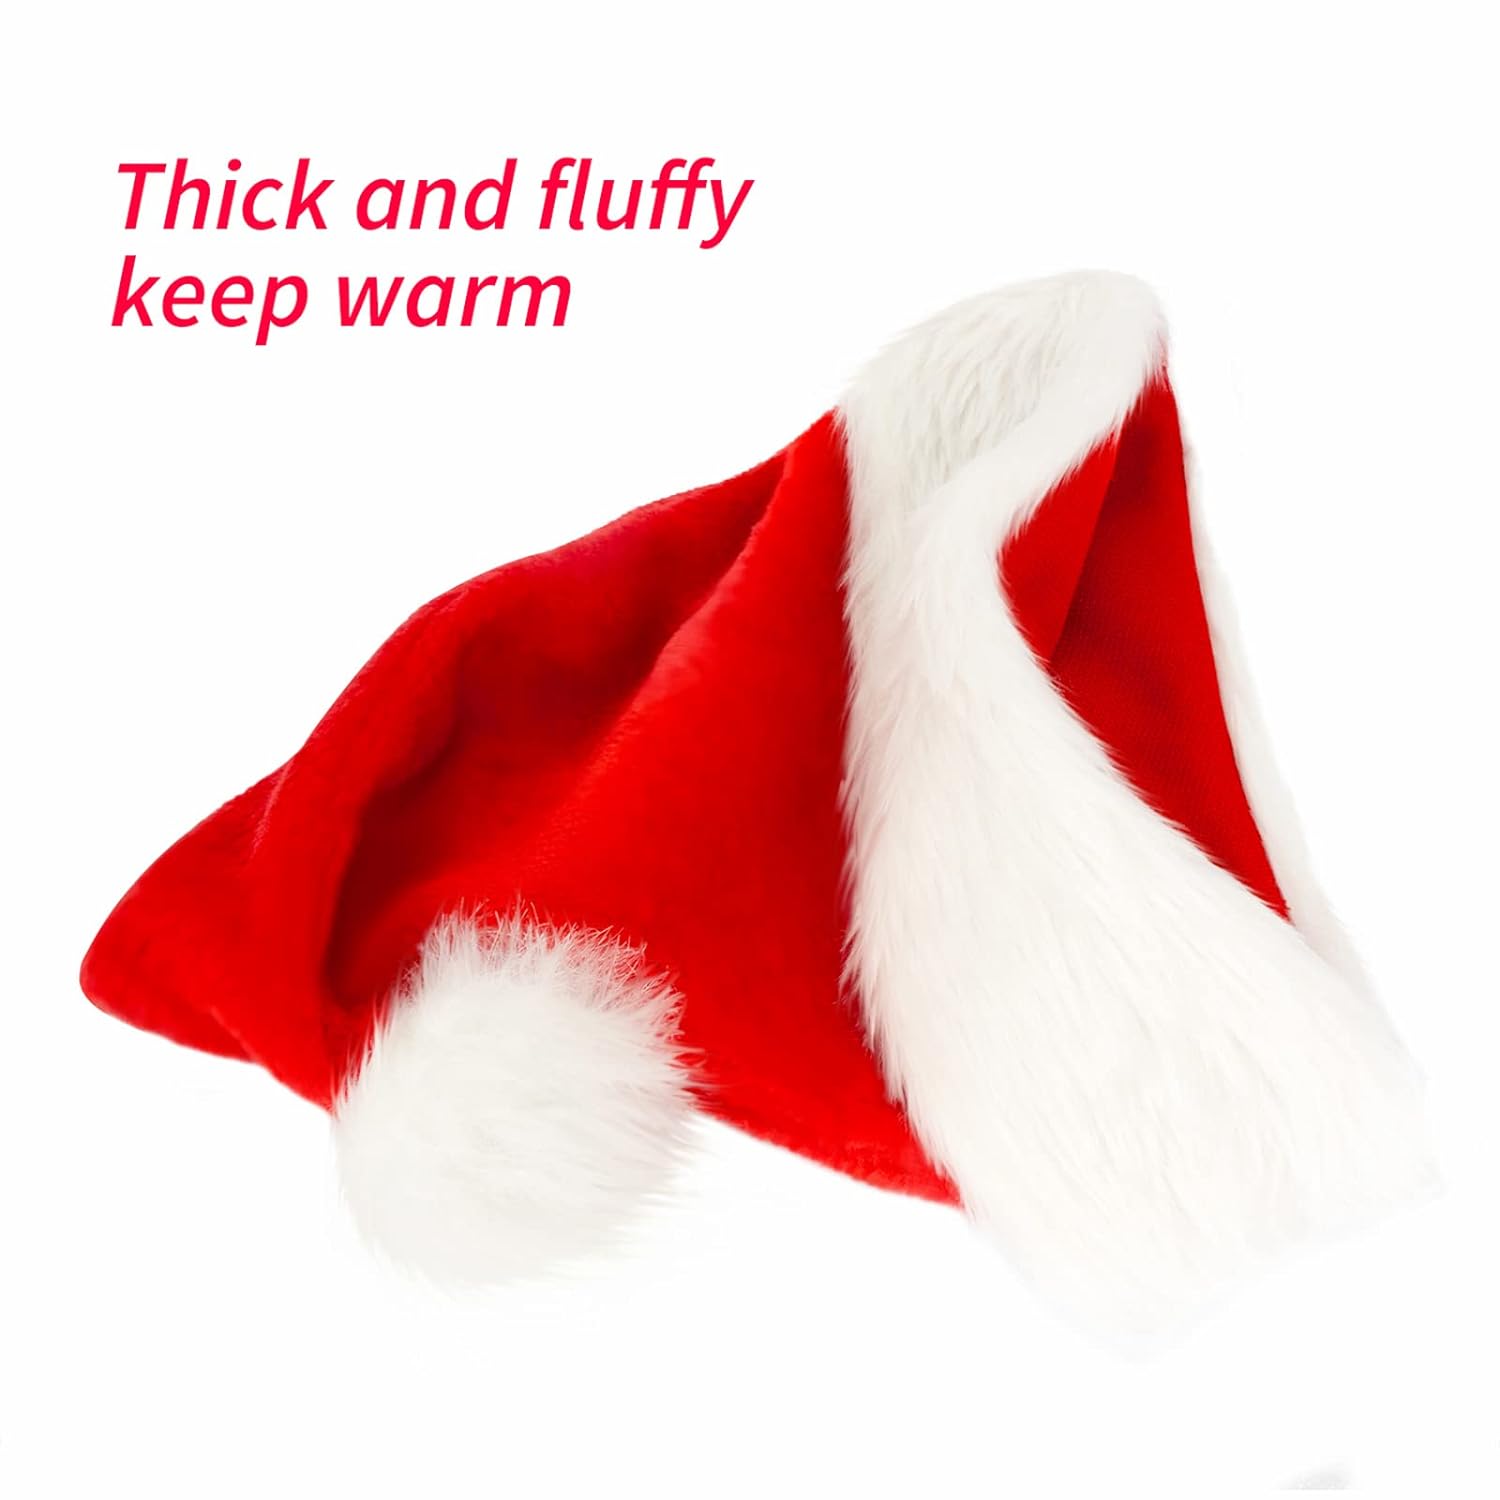 eCraftIndia Red and White Velvet Classic Fur Merry Christmas Hats, Santa Claus Caps for kids and Adults - XMAS Caps, Santa Hats for Christmas, New Year, Festive Holiday Party Celebration (Set of 24) 5